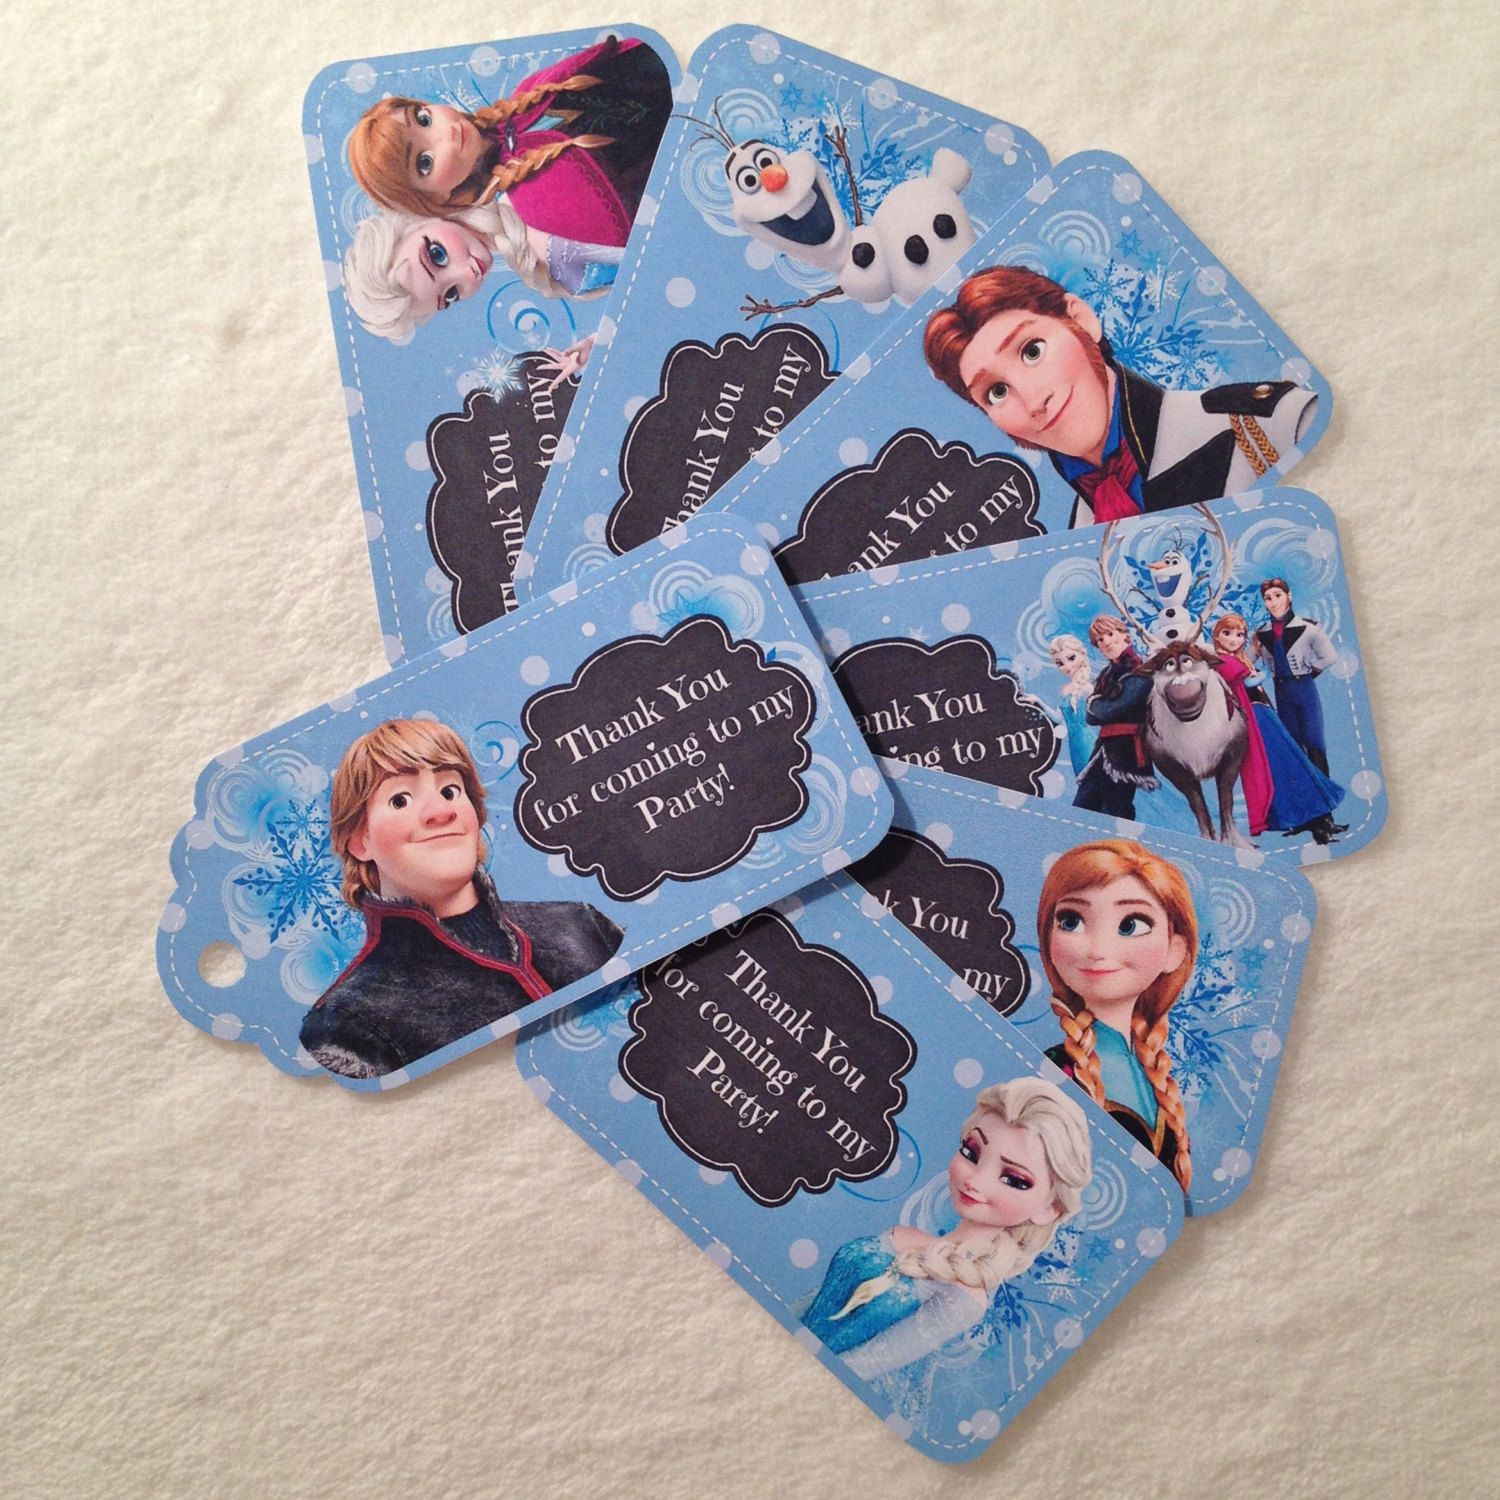 Thank You For Coming To My Party Gift Ideas
 10 FROZEN "Thank You for ing to my Party" Party Favor